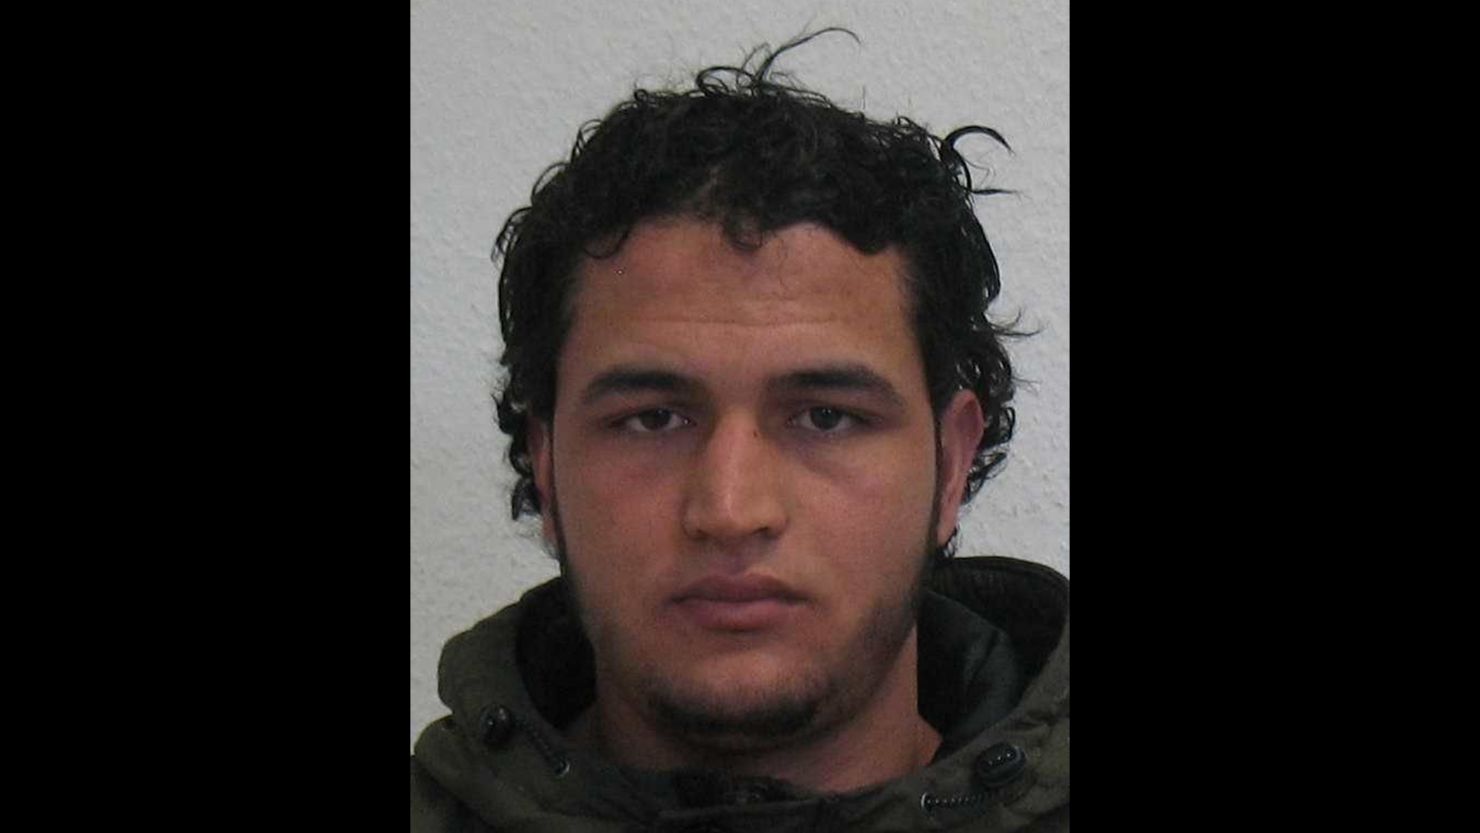 Anis Amri was being considered for deportation from Germany at the time of the attack.